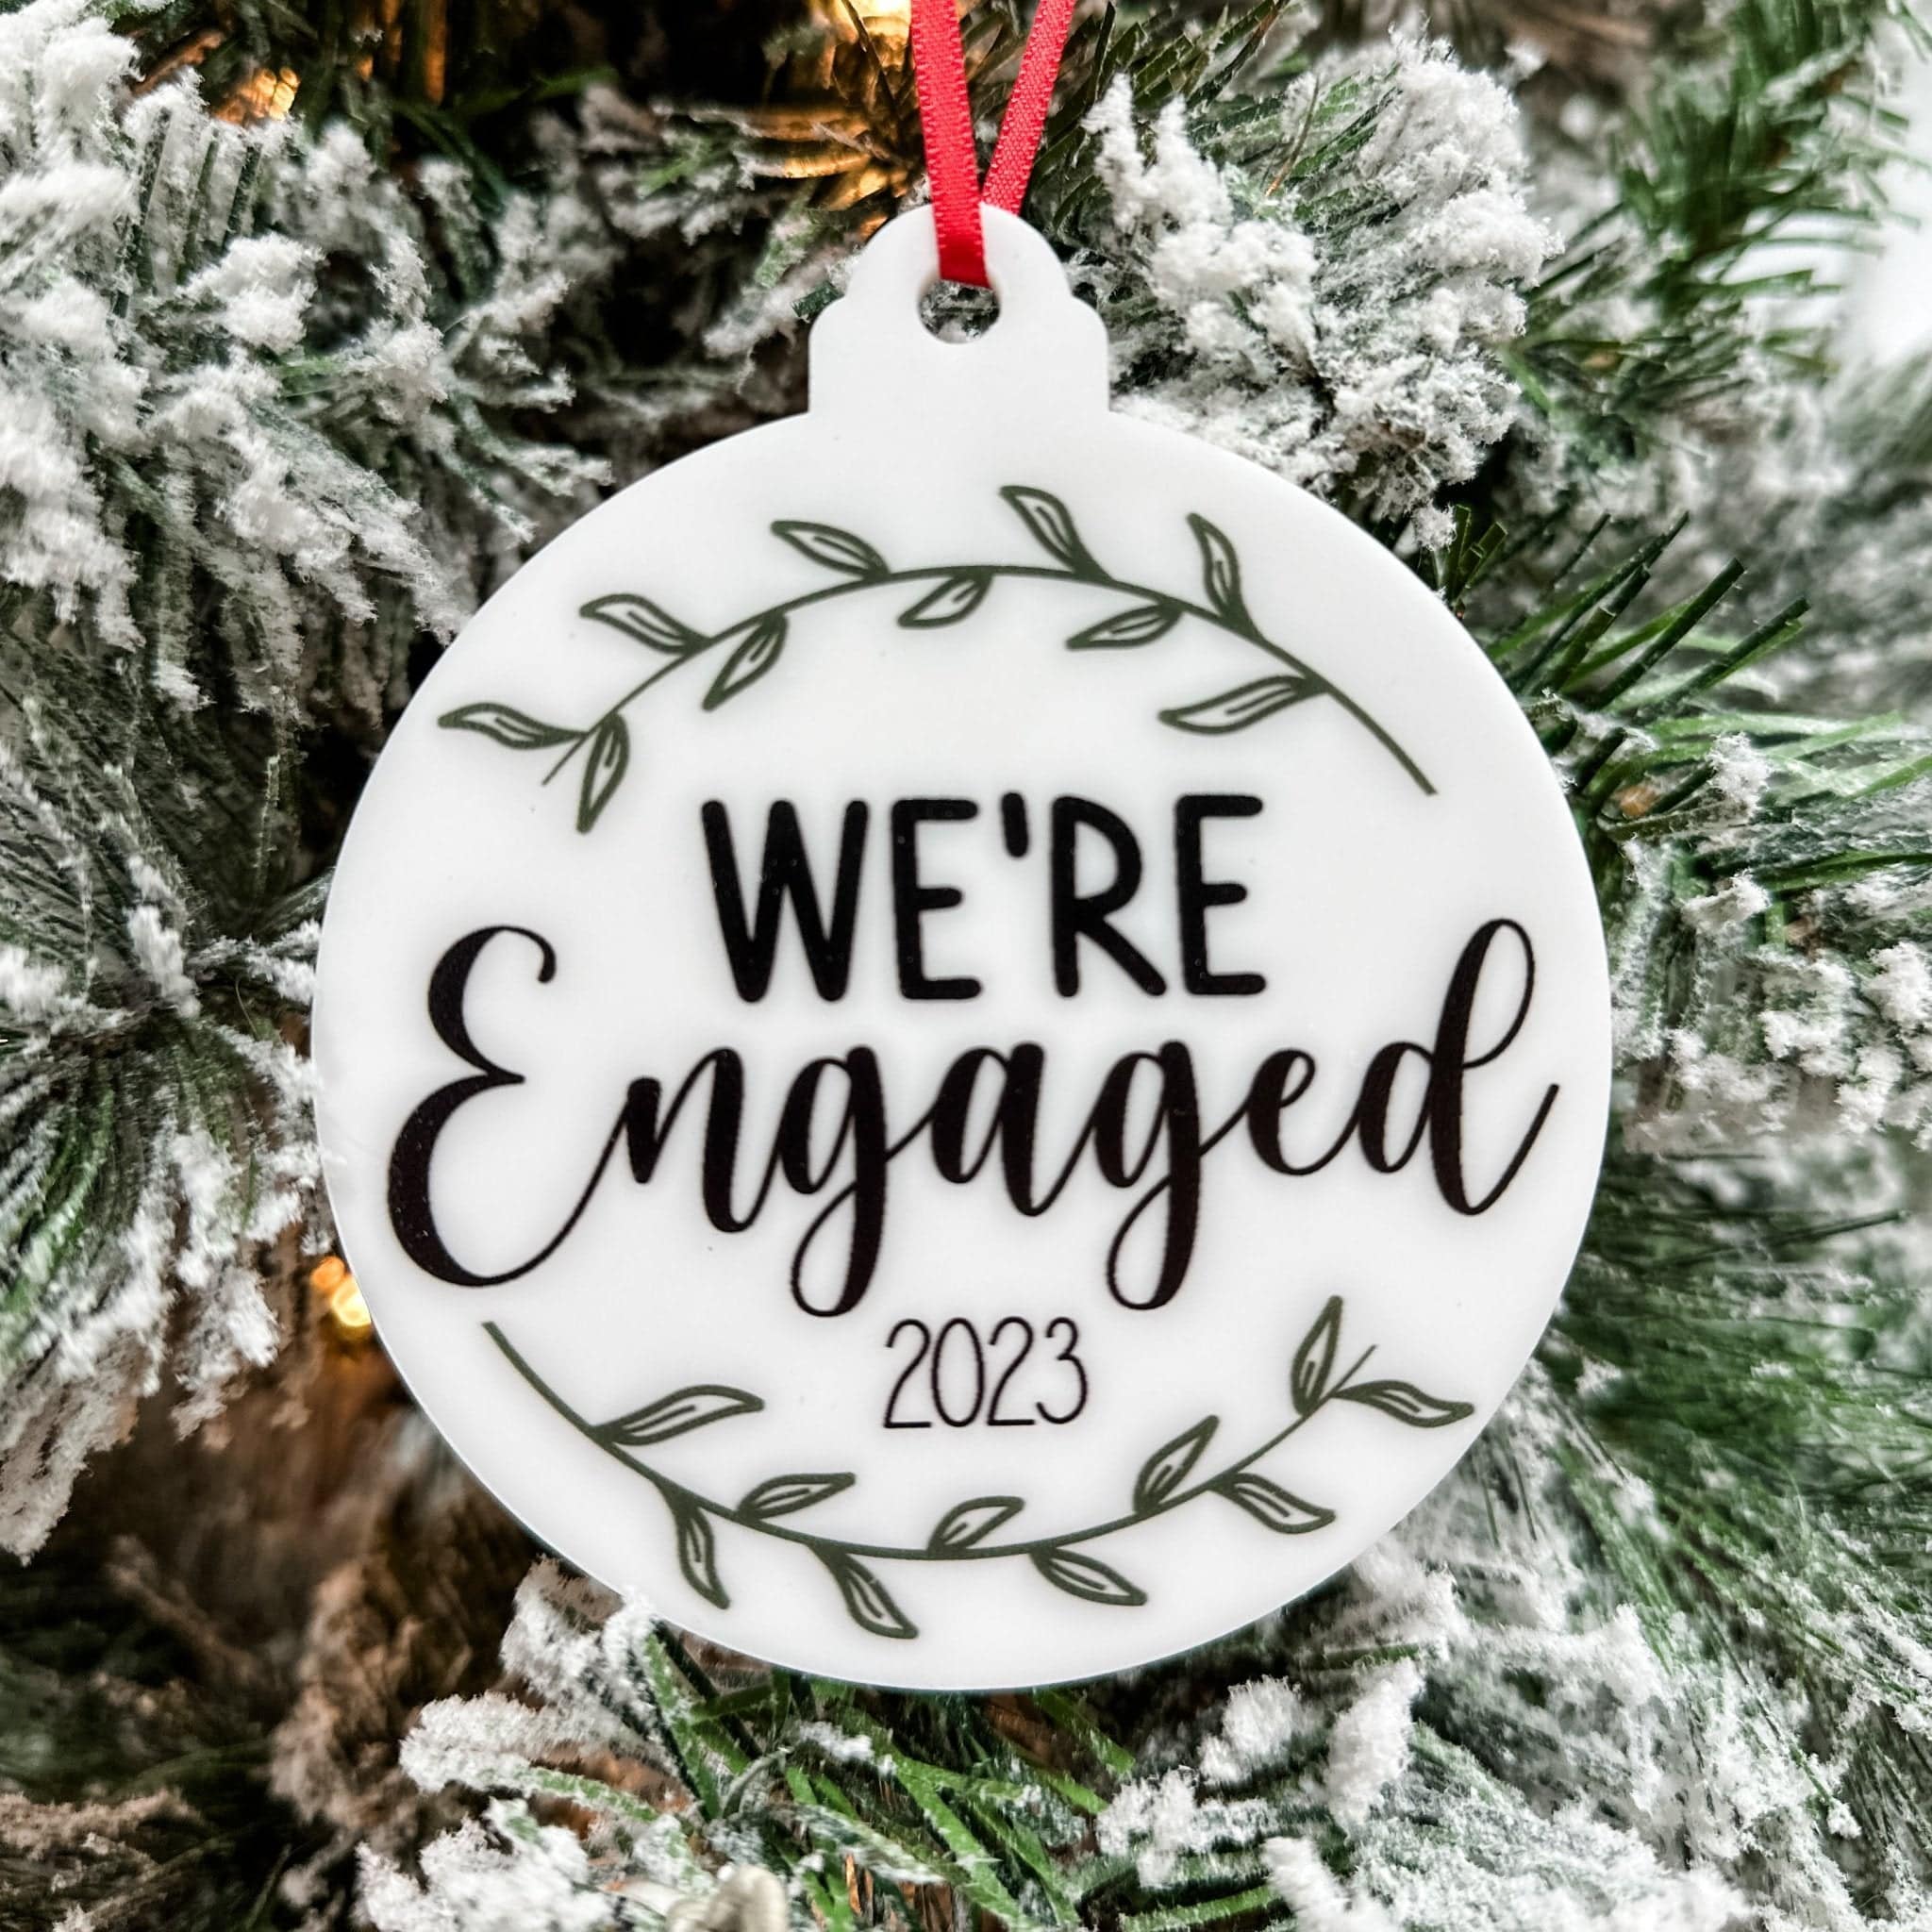 The Year We Got Married/Engaged Acrylic Ornament - Sticks & Doodles